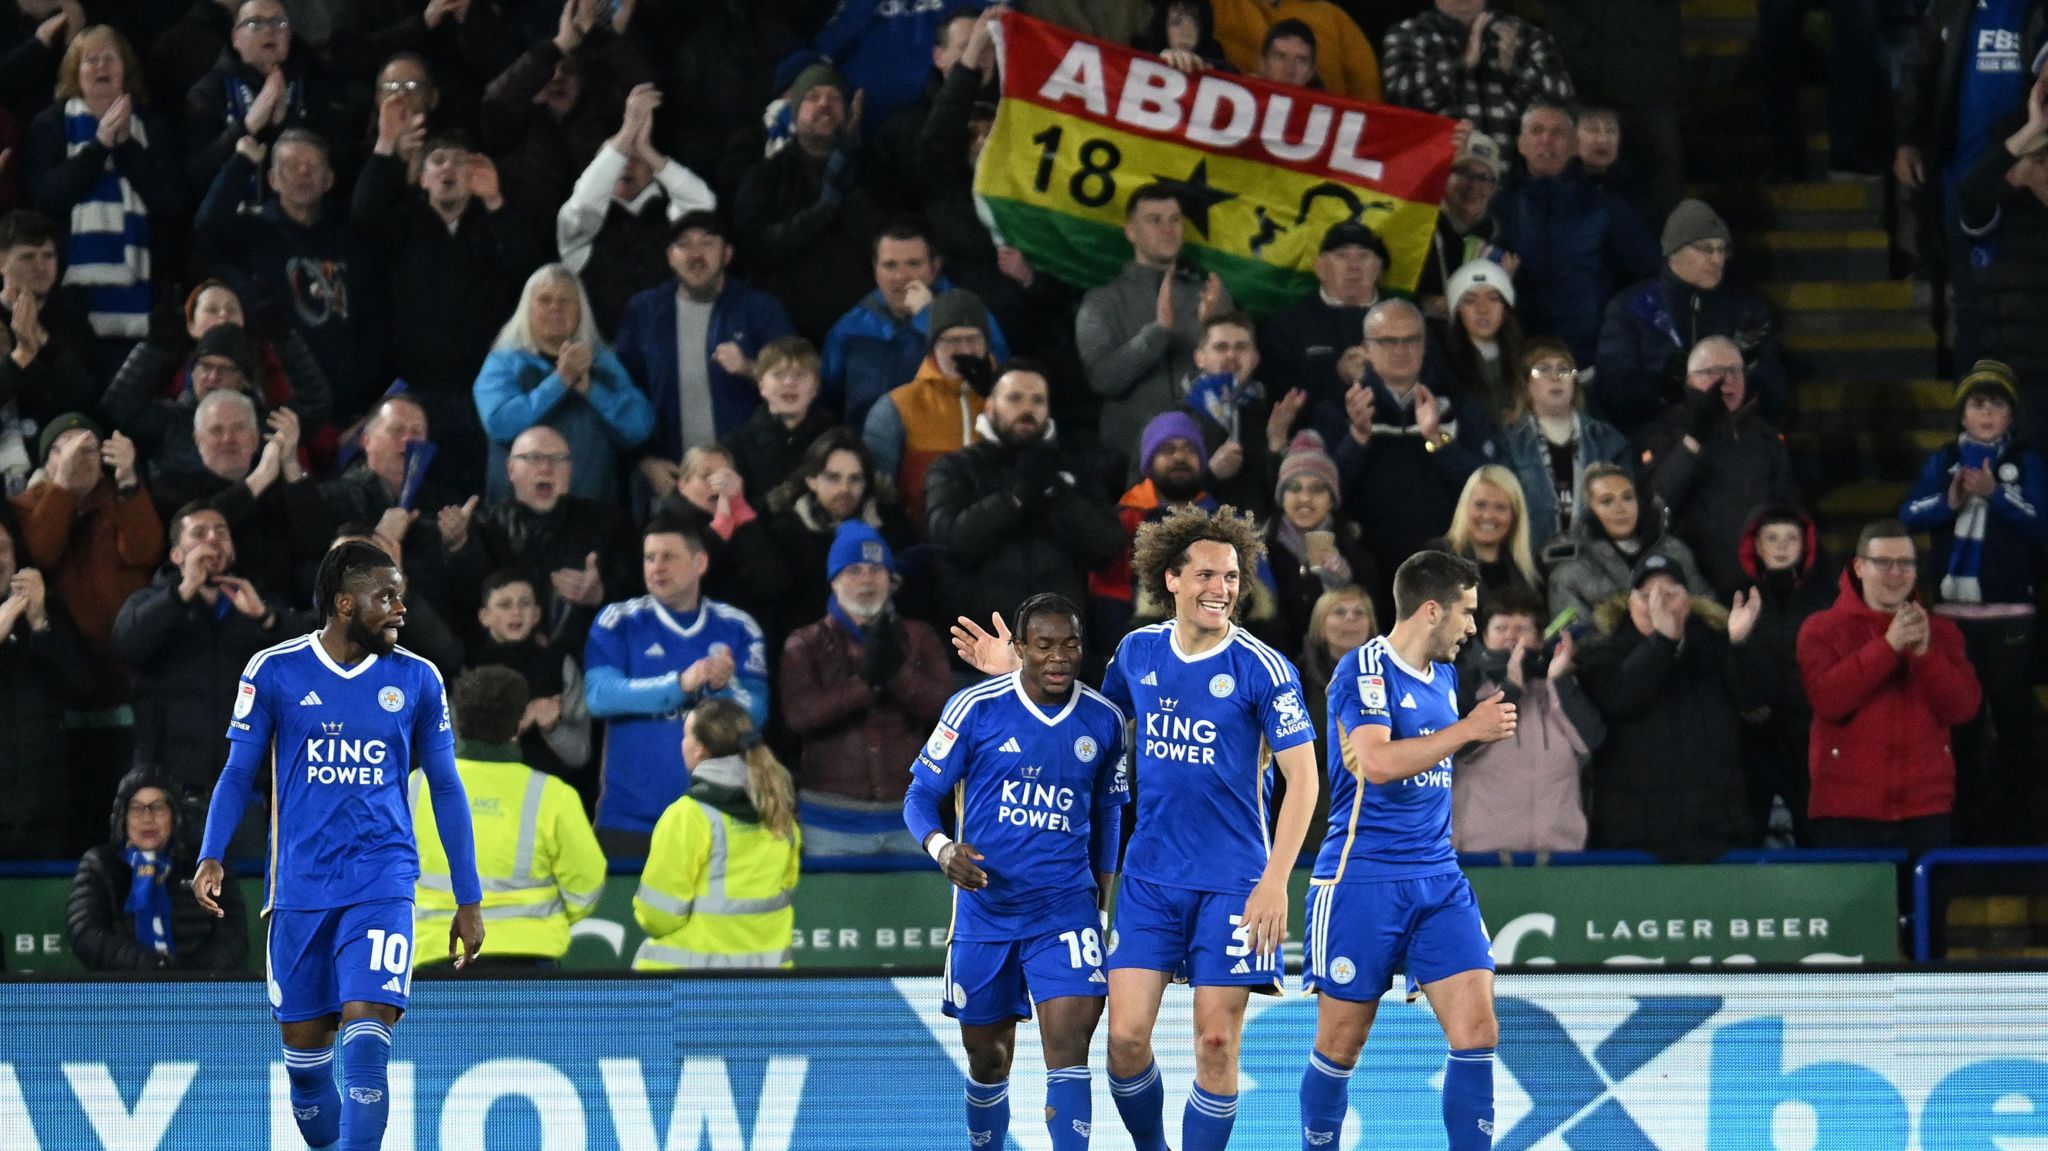 Leicester players celebrate in front of a Ghanaian flag that says "Abdul"